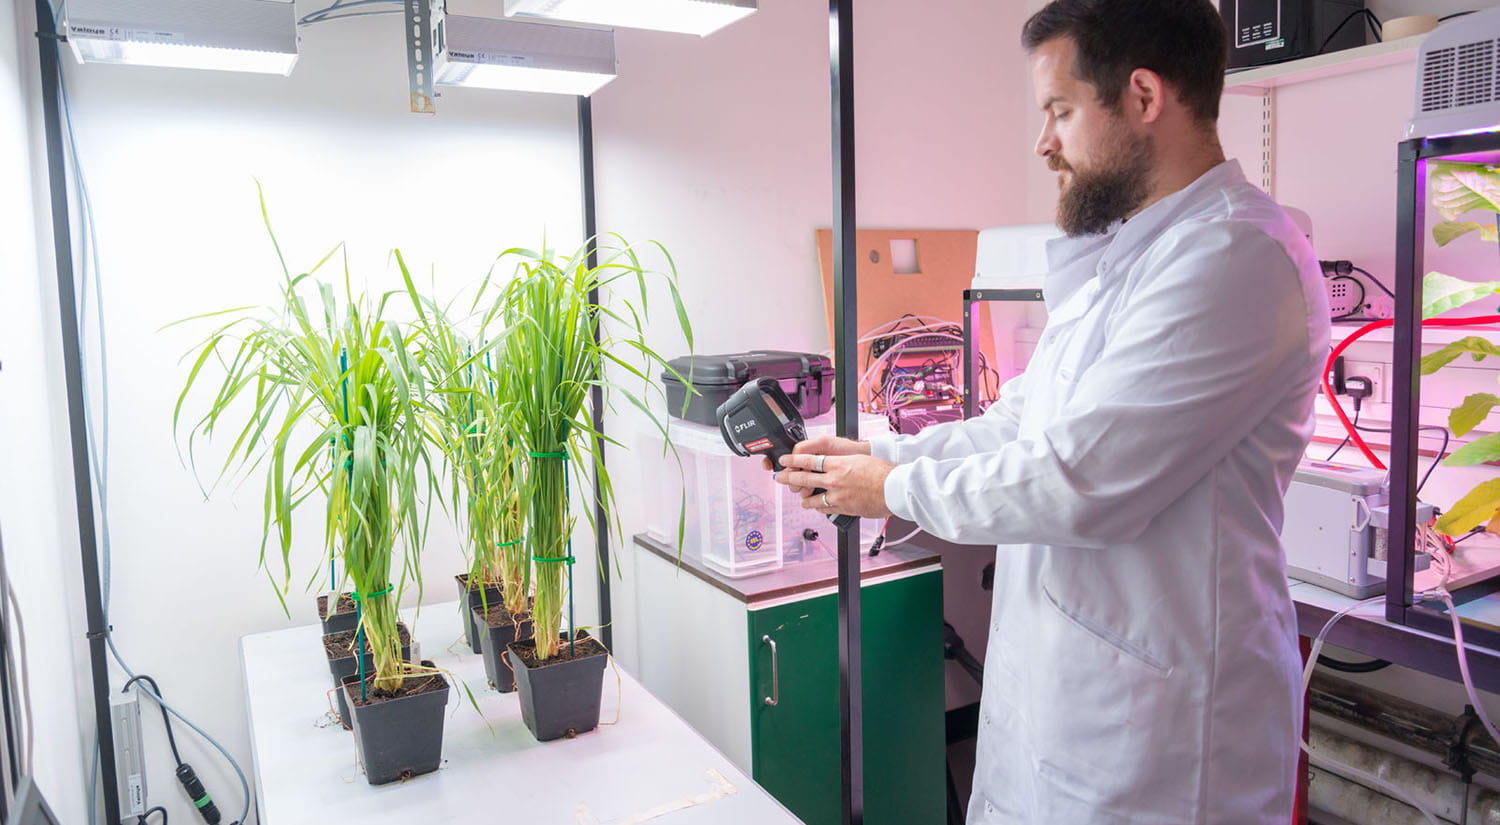 Student working with plants in a biology laboratory